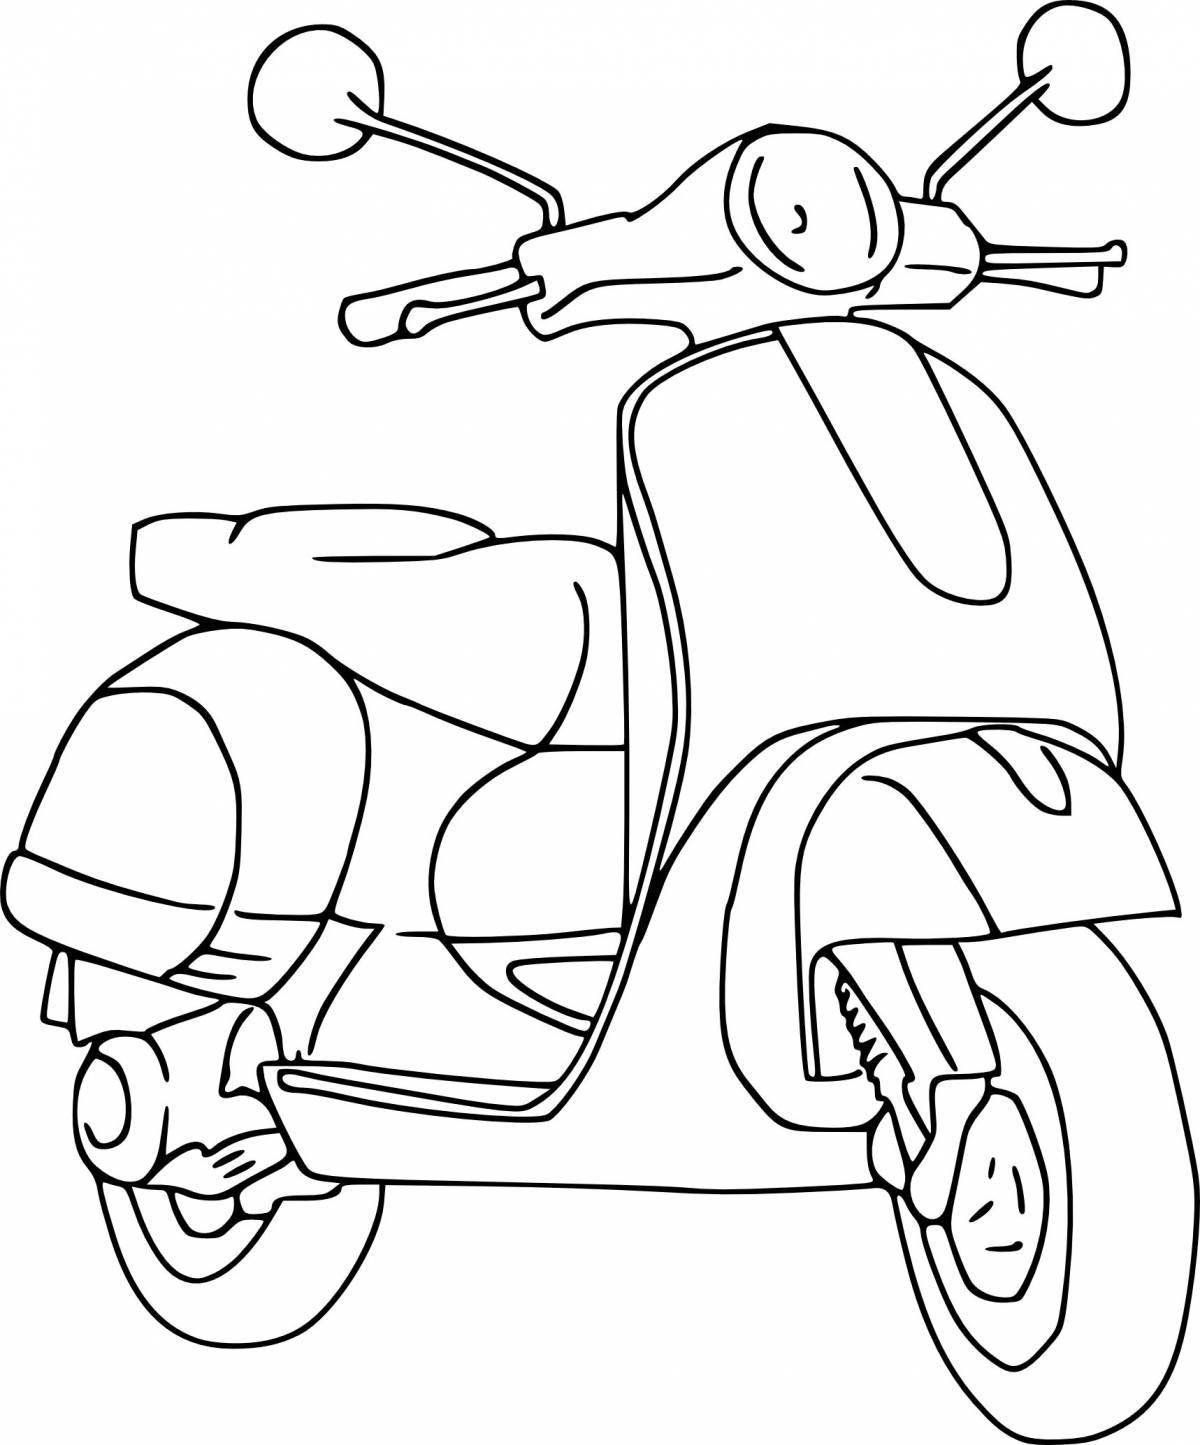 Fabulous moped coloring page